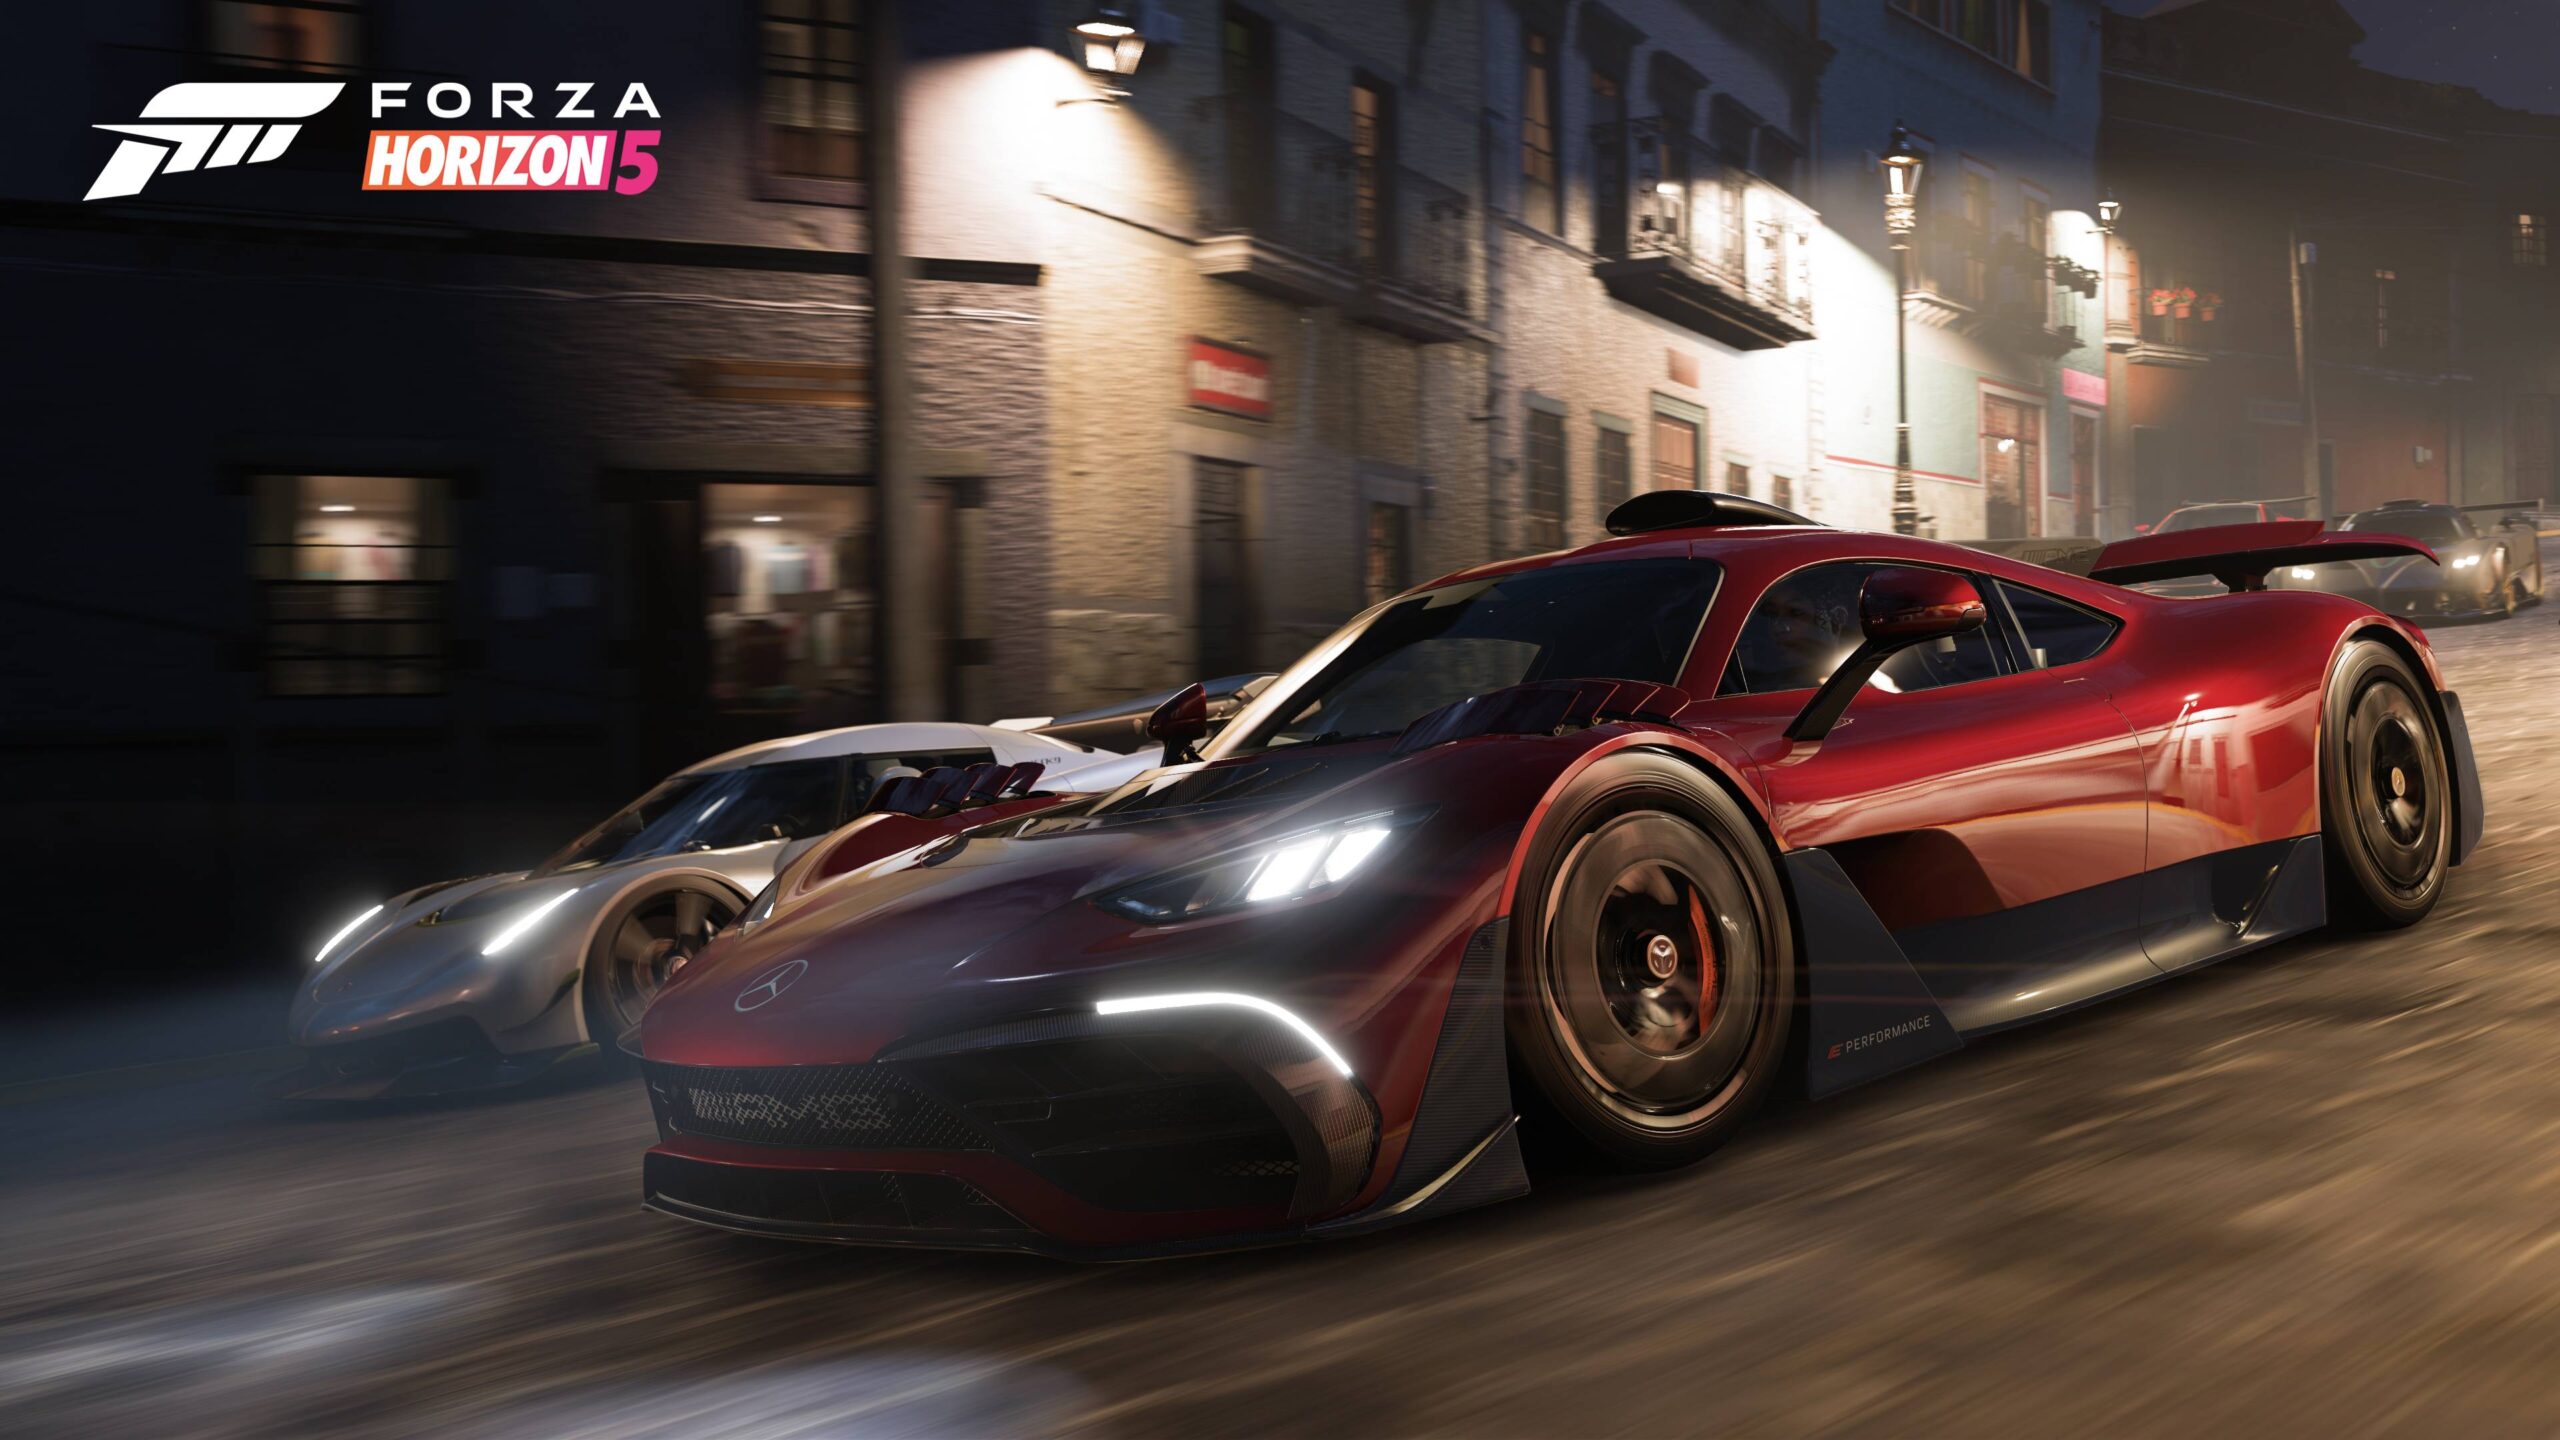 Watch Forza Horizon 5's spectacular opening right here, right now